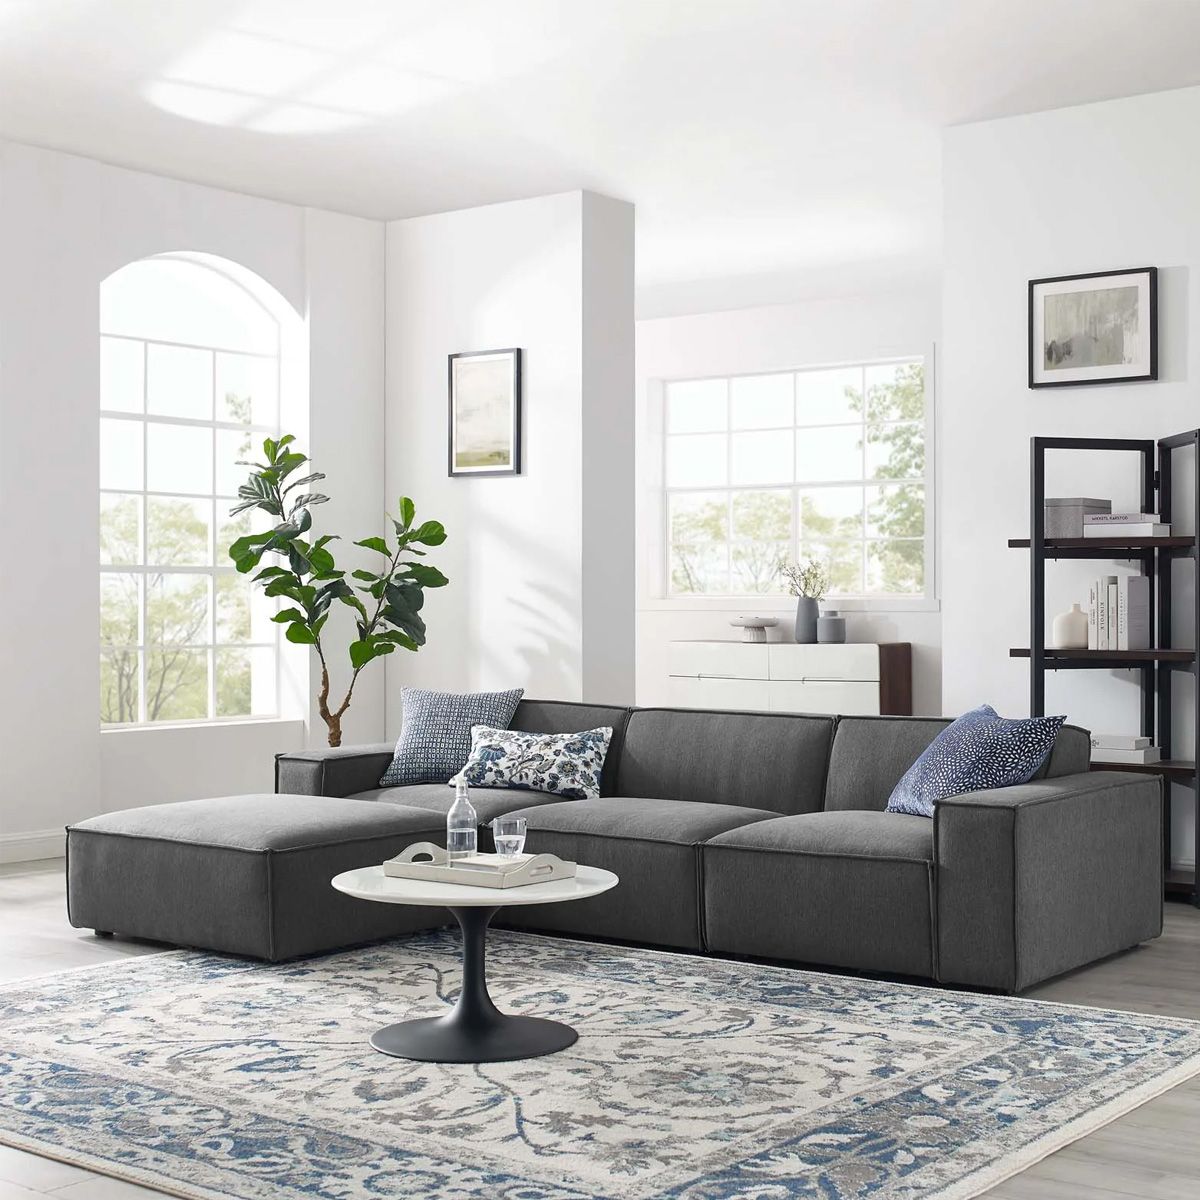 Vitality Sectional Sofa 4 Pieces In Dark Grey From Aed 1949 | Atoz Furniture Within Dark Gray Sectional Sofas (Photo 6 of 15)